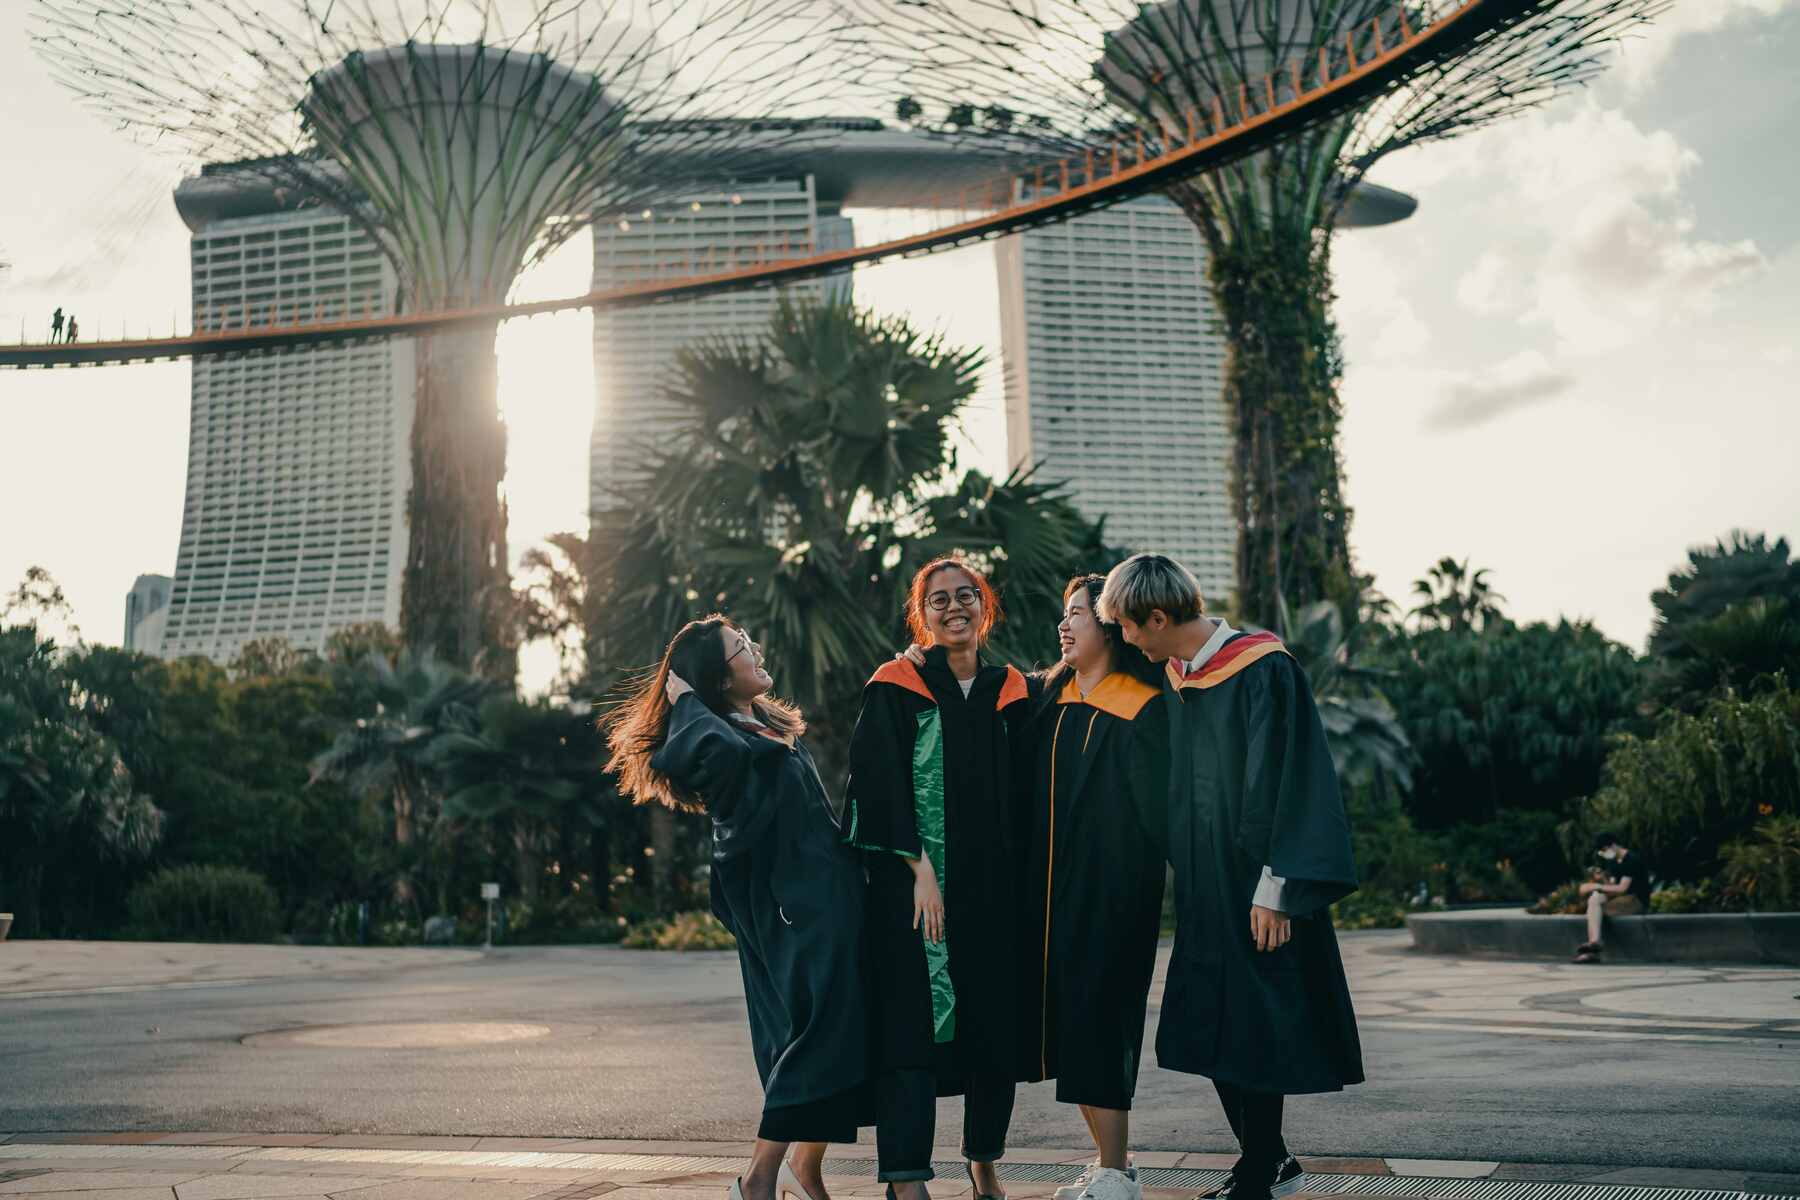 Four students posing together with their graduation robes and caps